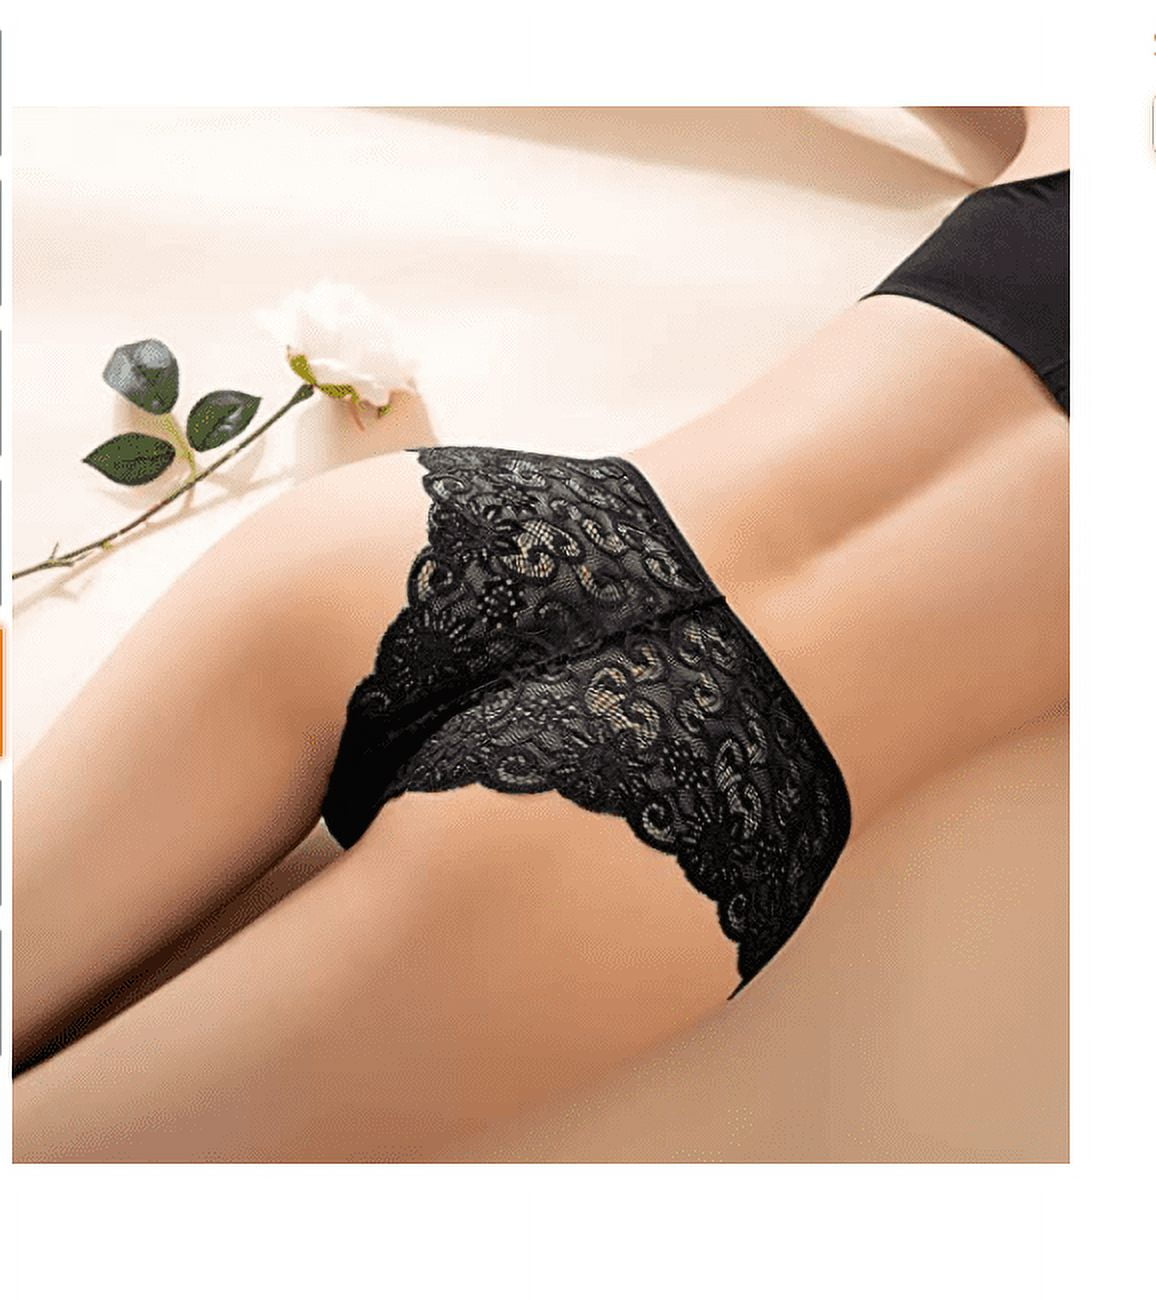 Plus Size Seamless Lace Briefs 5 Pack Womens Sexy Lace Knickers T5FW From  Katrinaivy, $48.5